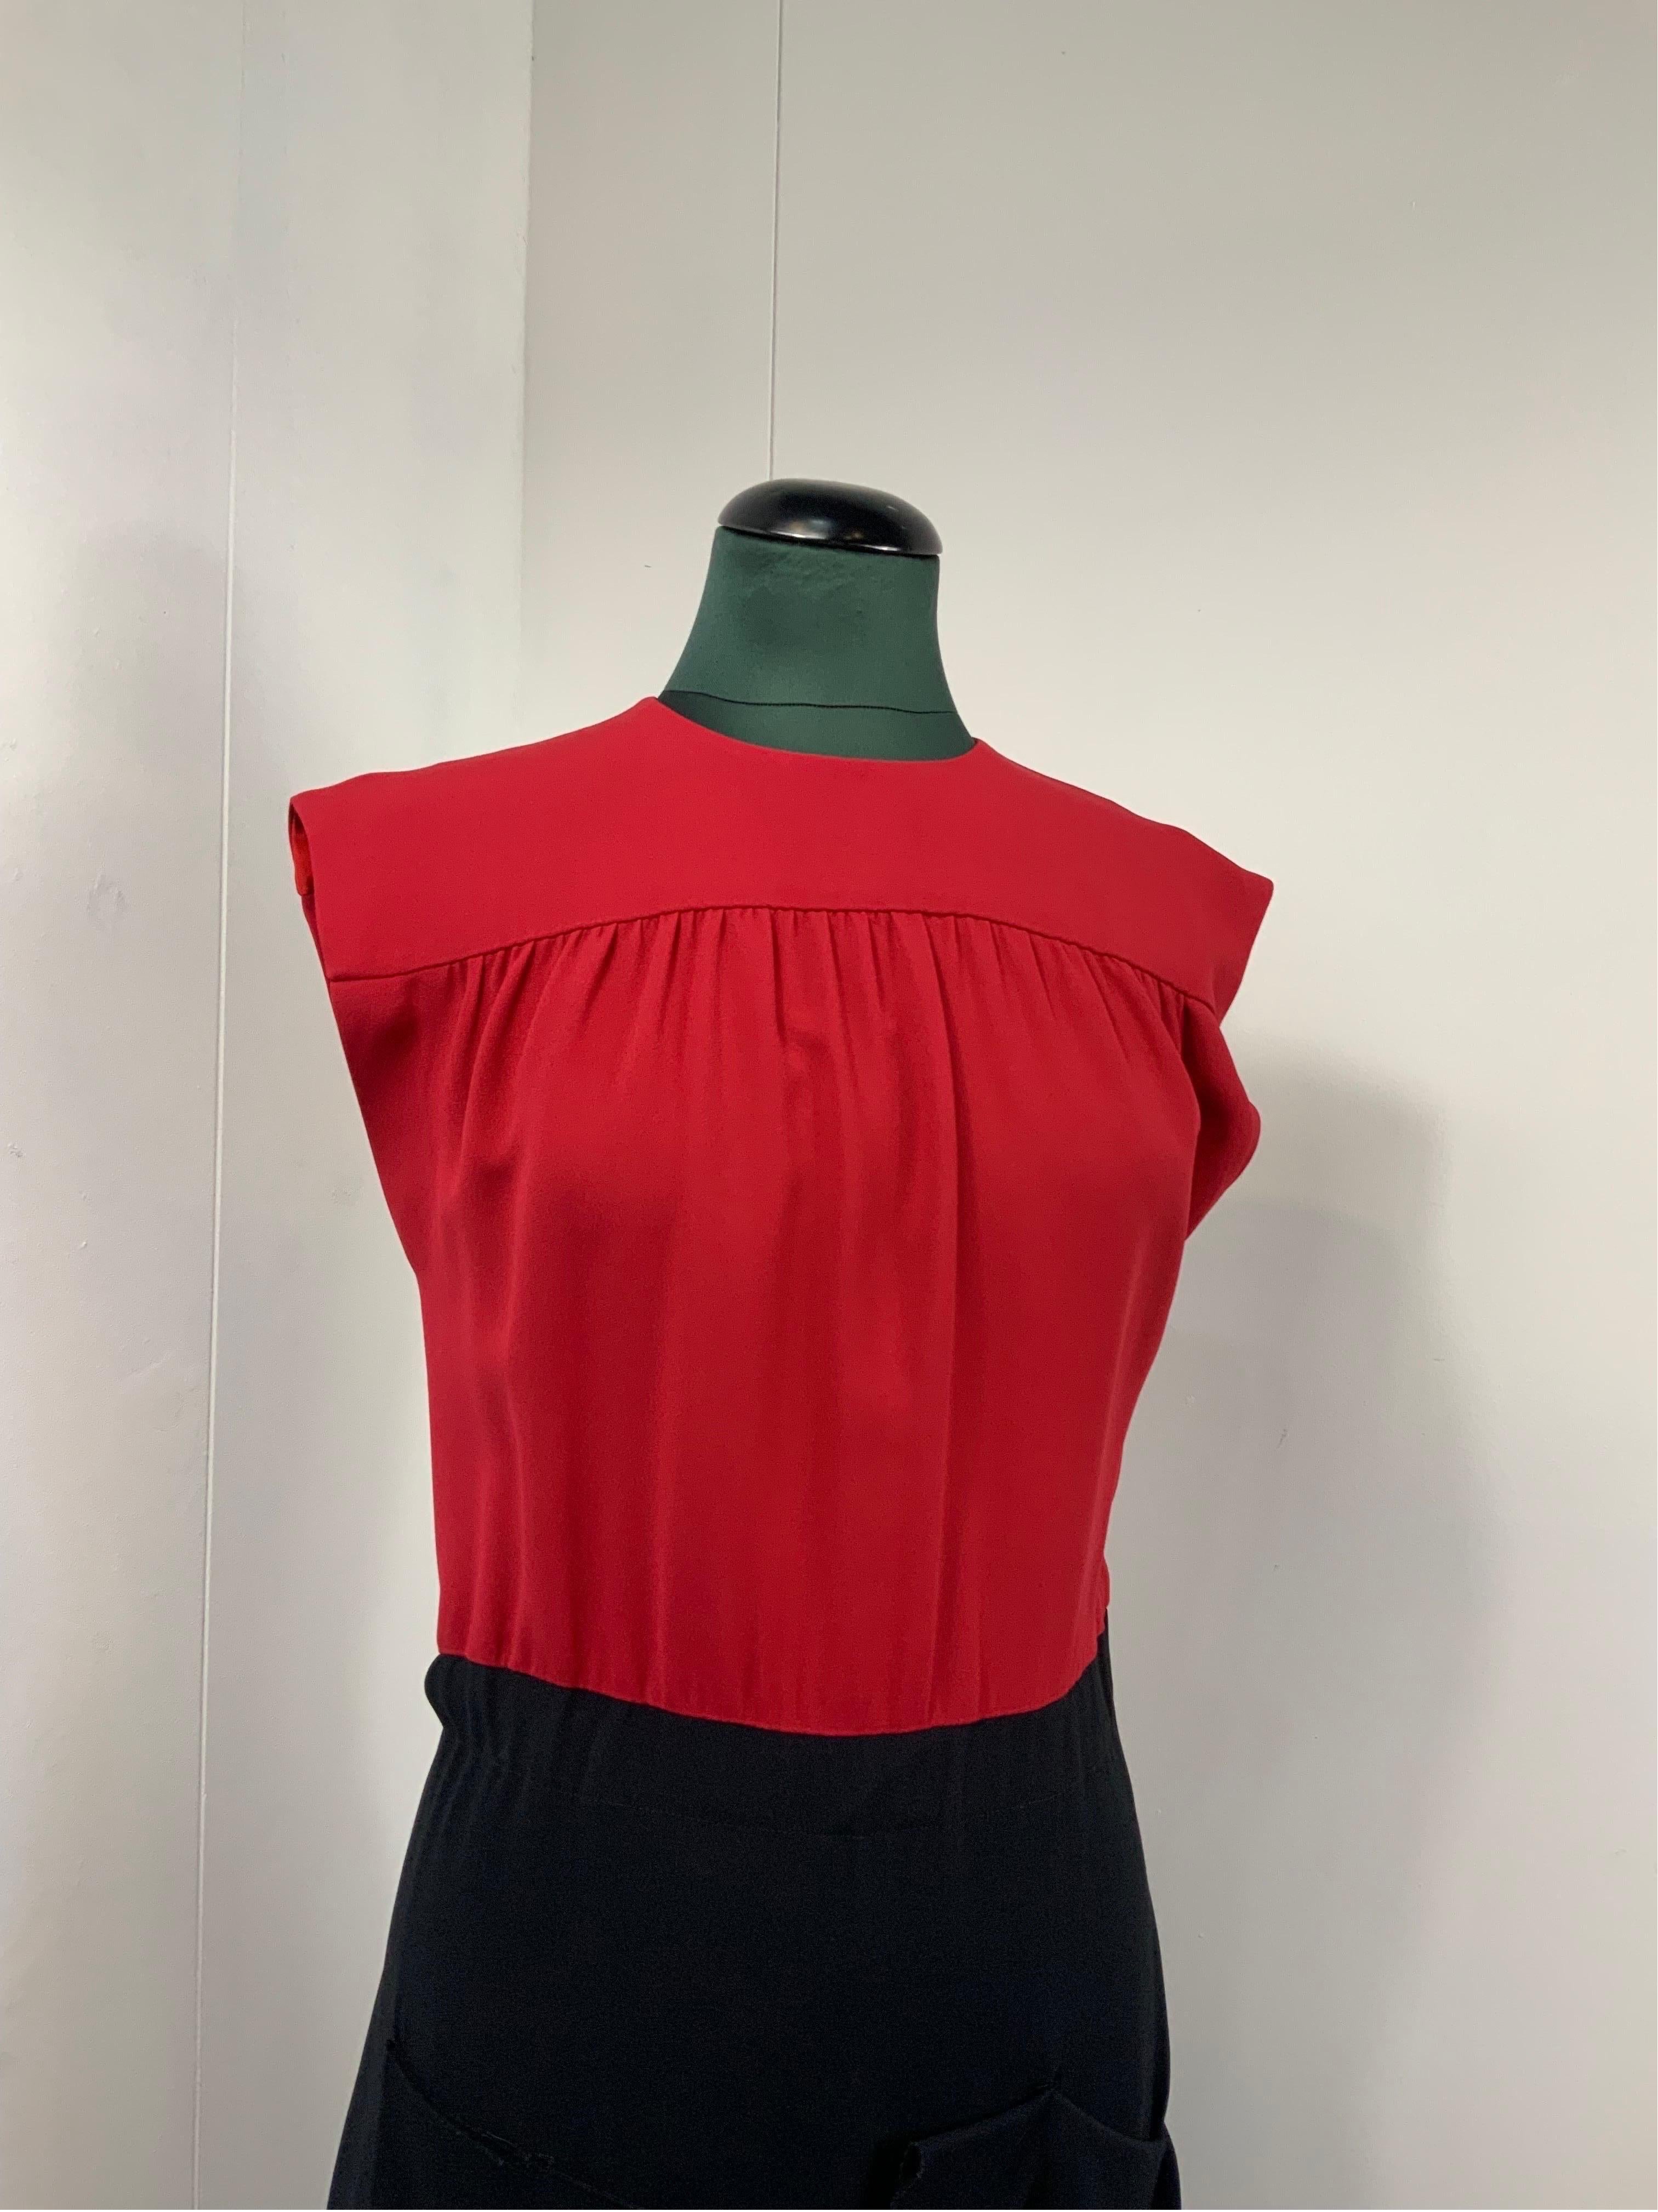 MIUMIU DRESS
Two-tone. Very dark red and navy blue.
In acetate, viscose. Lined.
Side zip closure.
Italian size 40.
Shoulders 44 CM
Bust 42 CM
Length 96 CM
Good overall condition with signs of normal use.